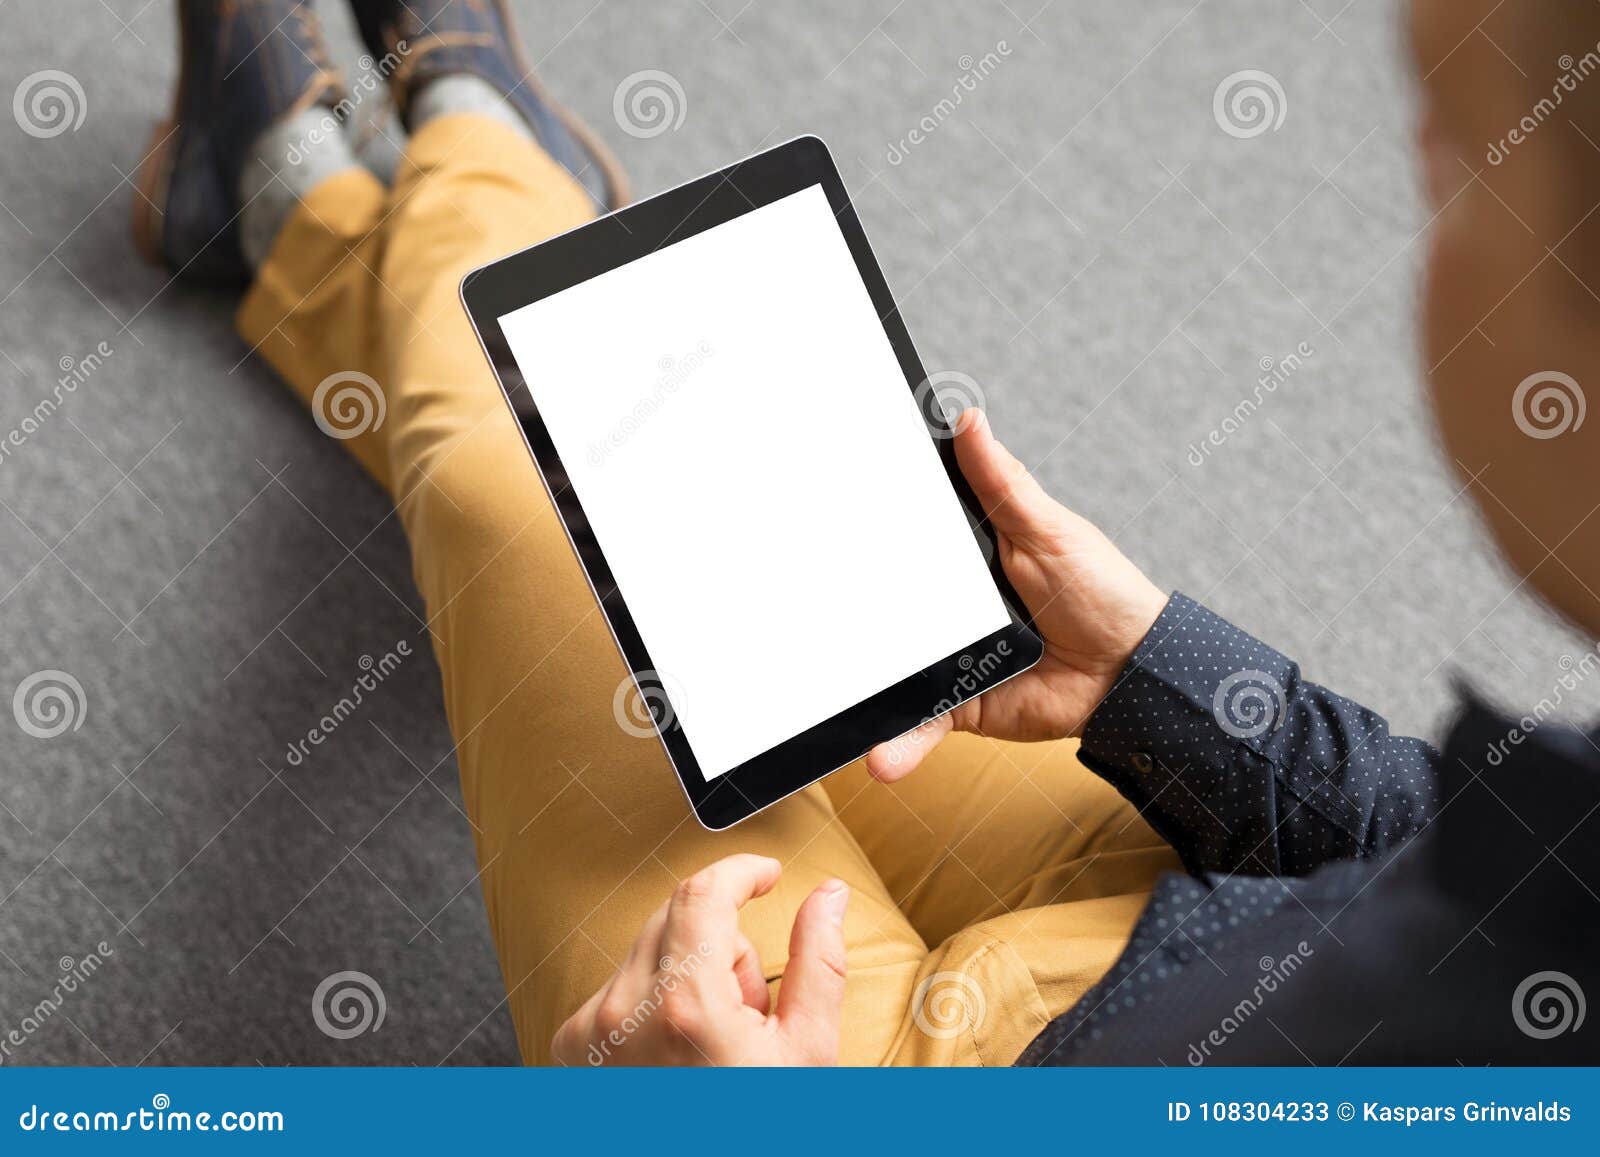 template and mockup for tablet app , vertical screen orientation